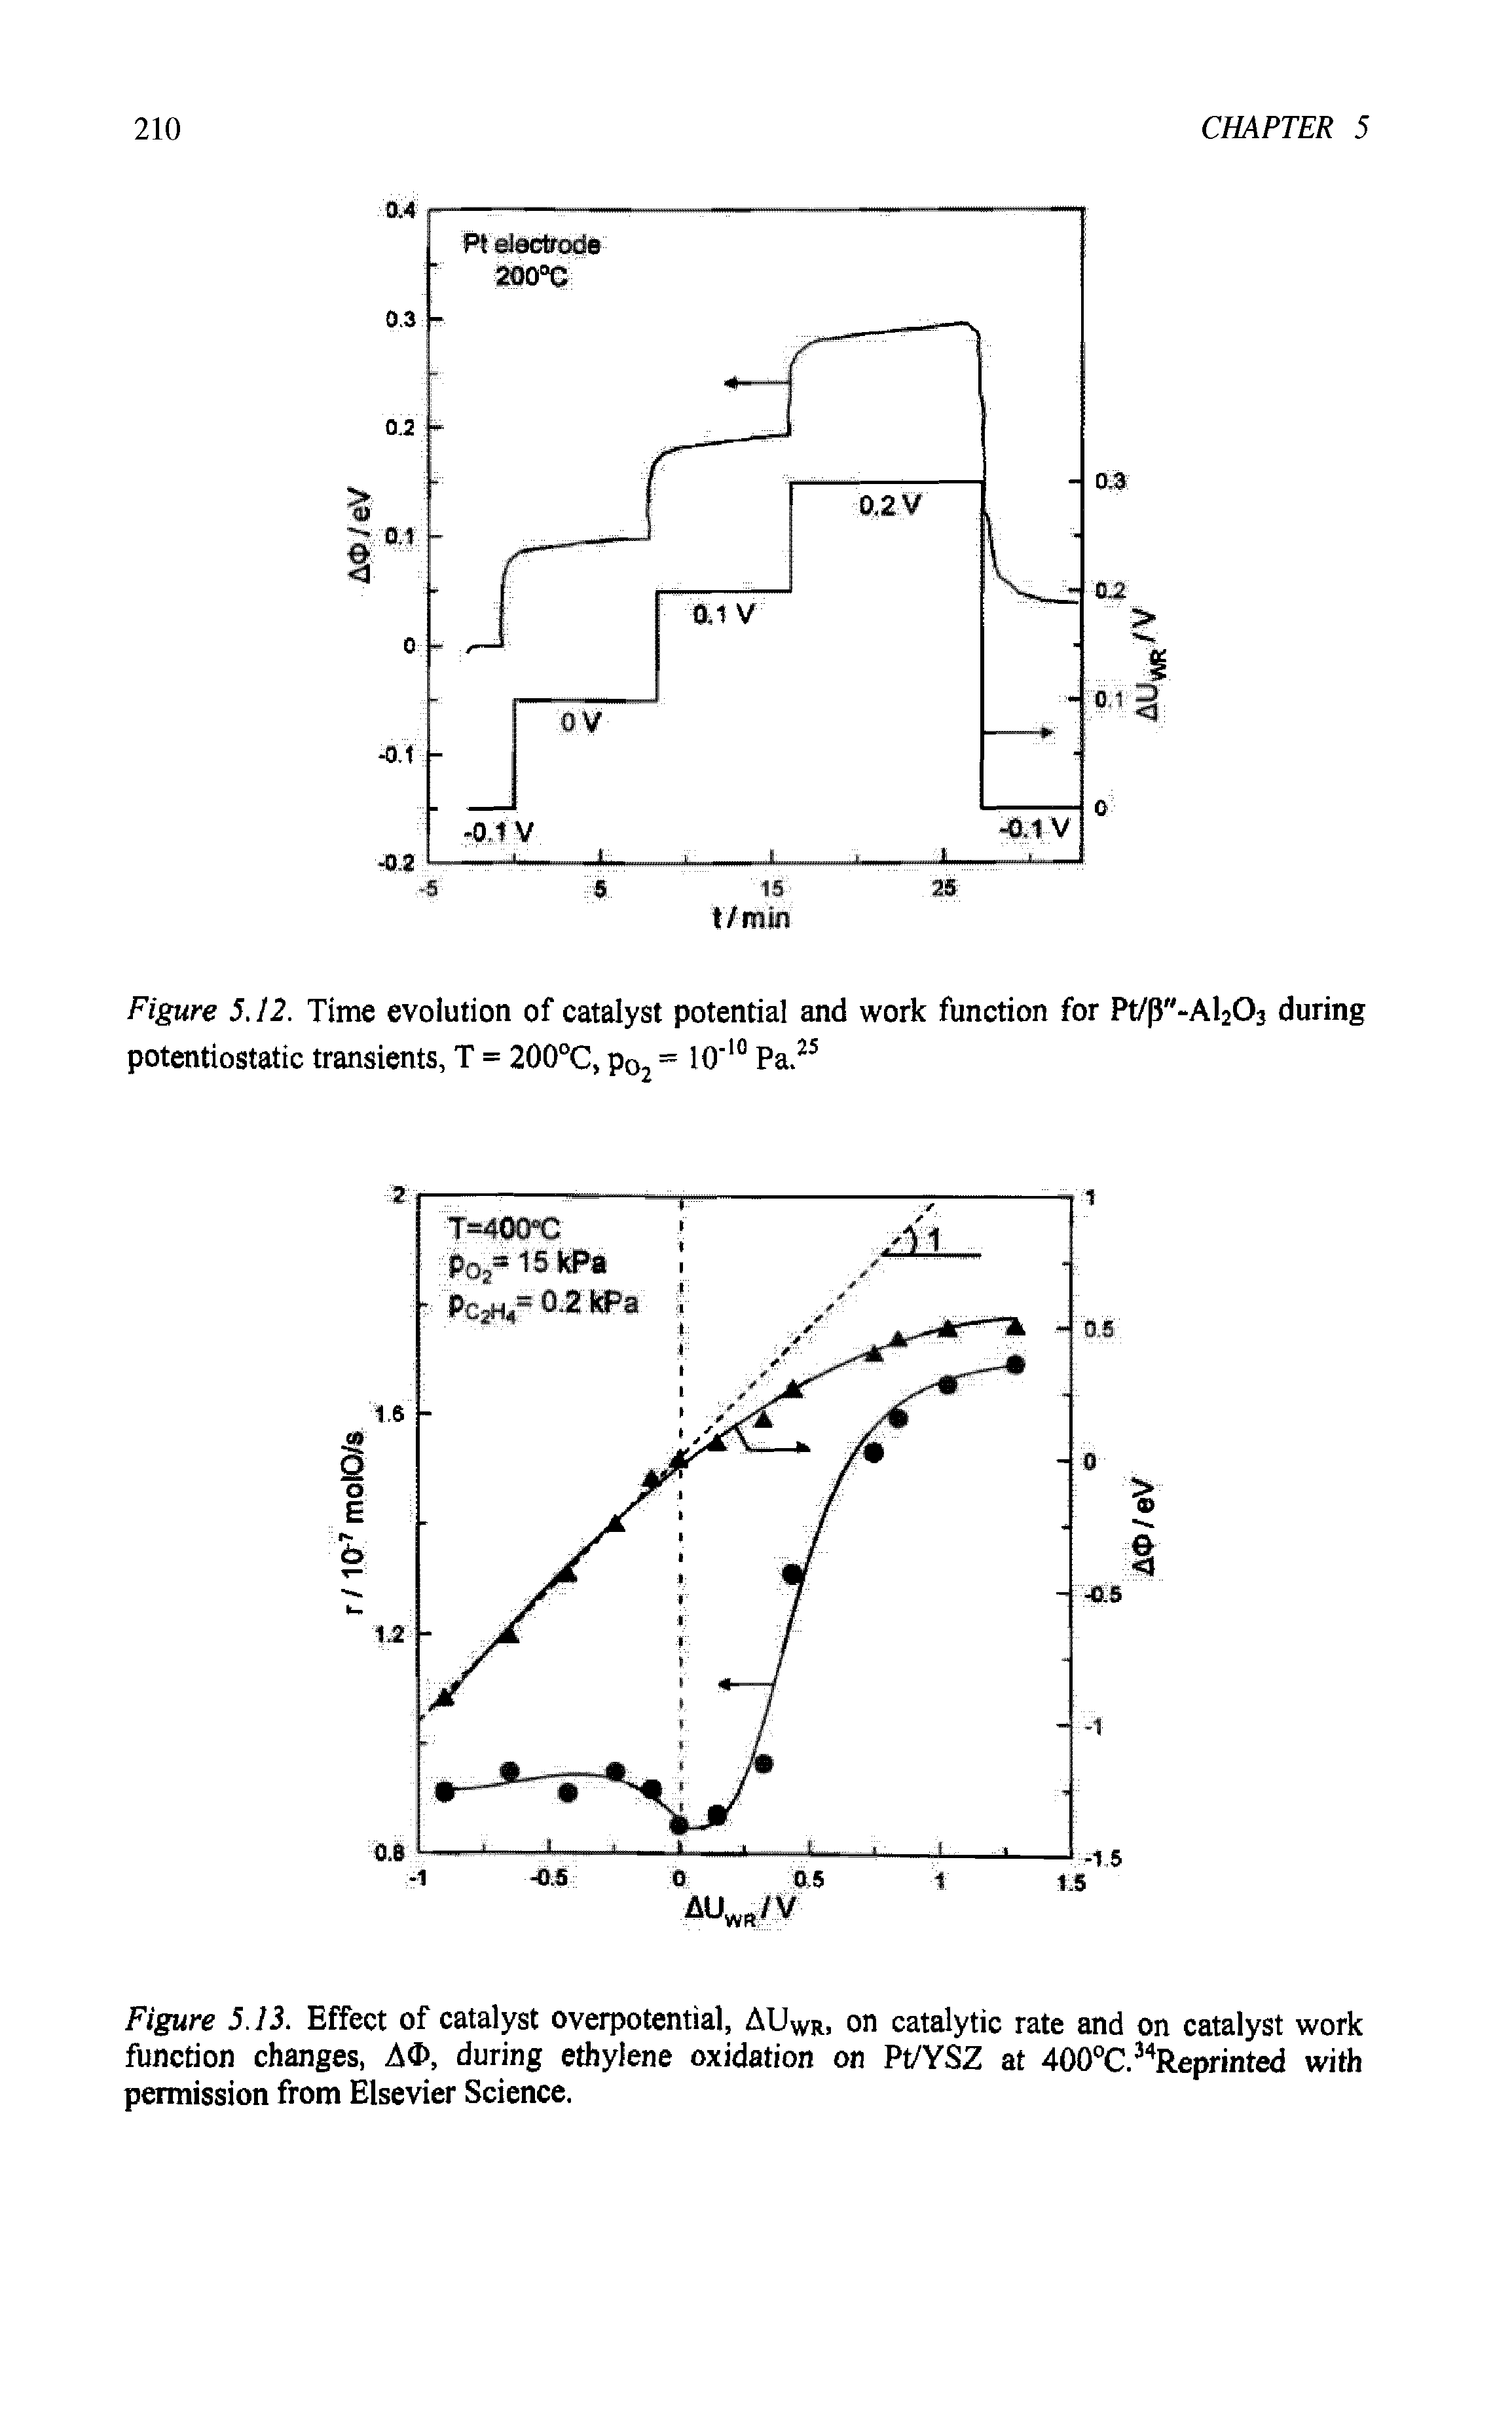 Figure 5.13. Effect of catalyst overpotential, AUWR, on catalytic rate and on catalyst work function changes, AO, during ethylene oxidation on Pt/YSZ at 400°C.34Reprinted with permission from Elsevier Science.